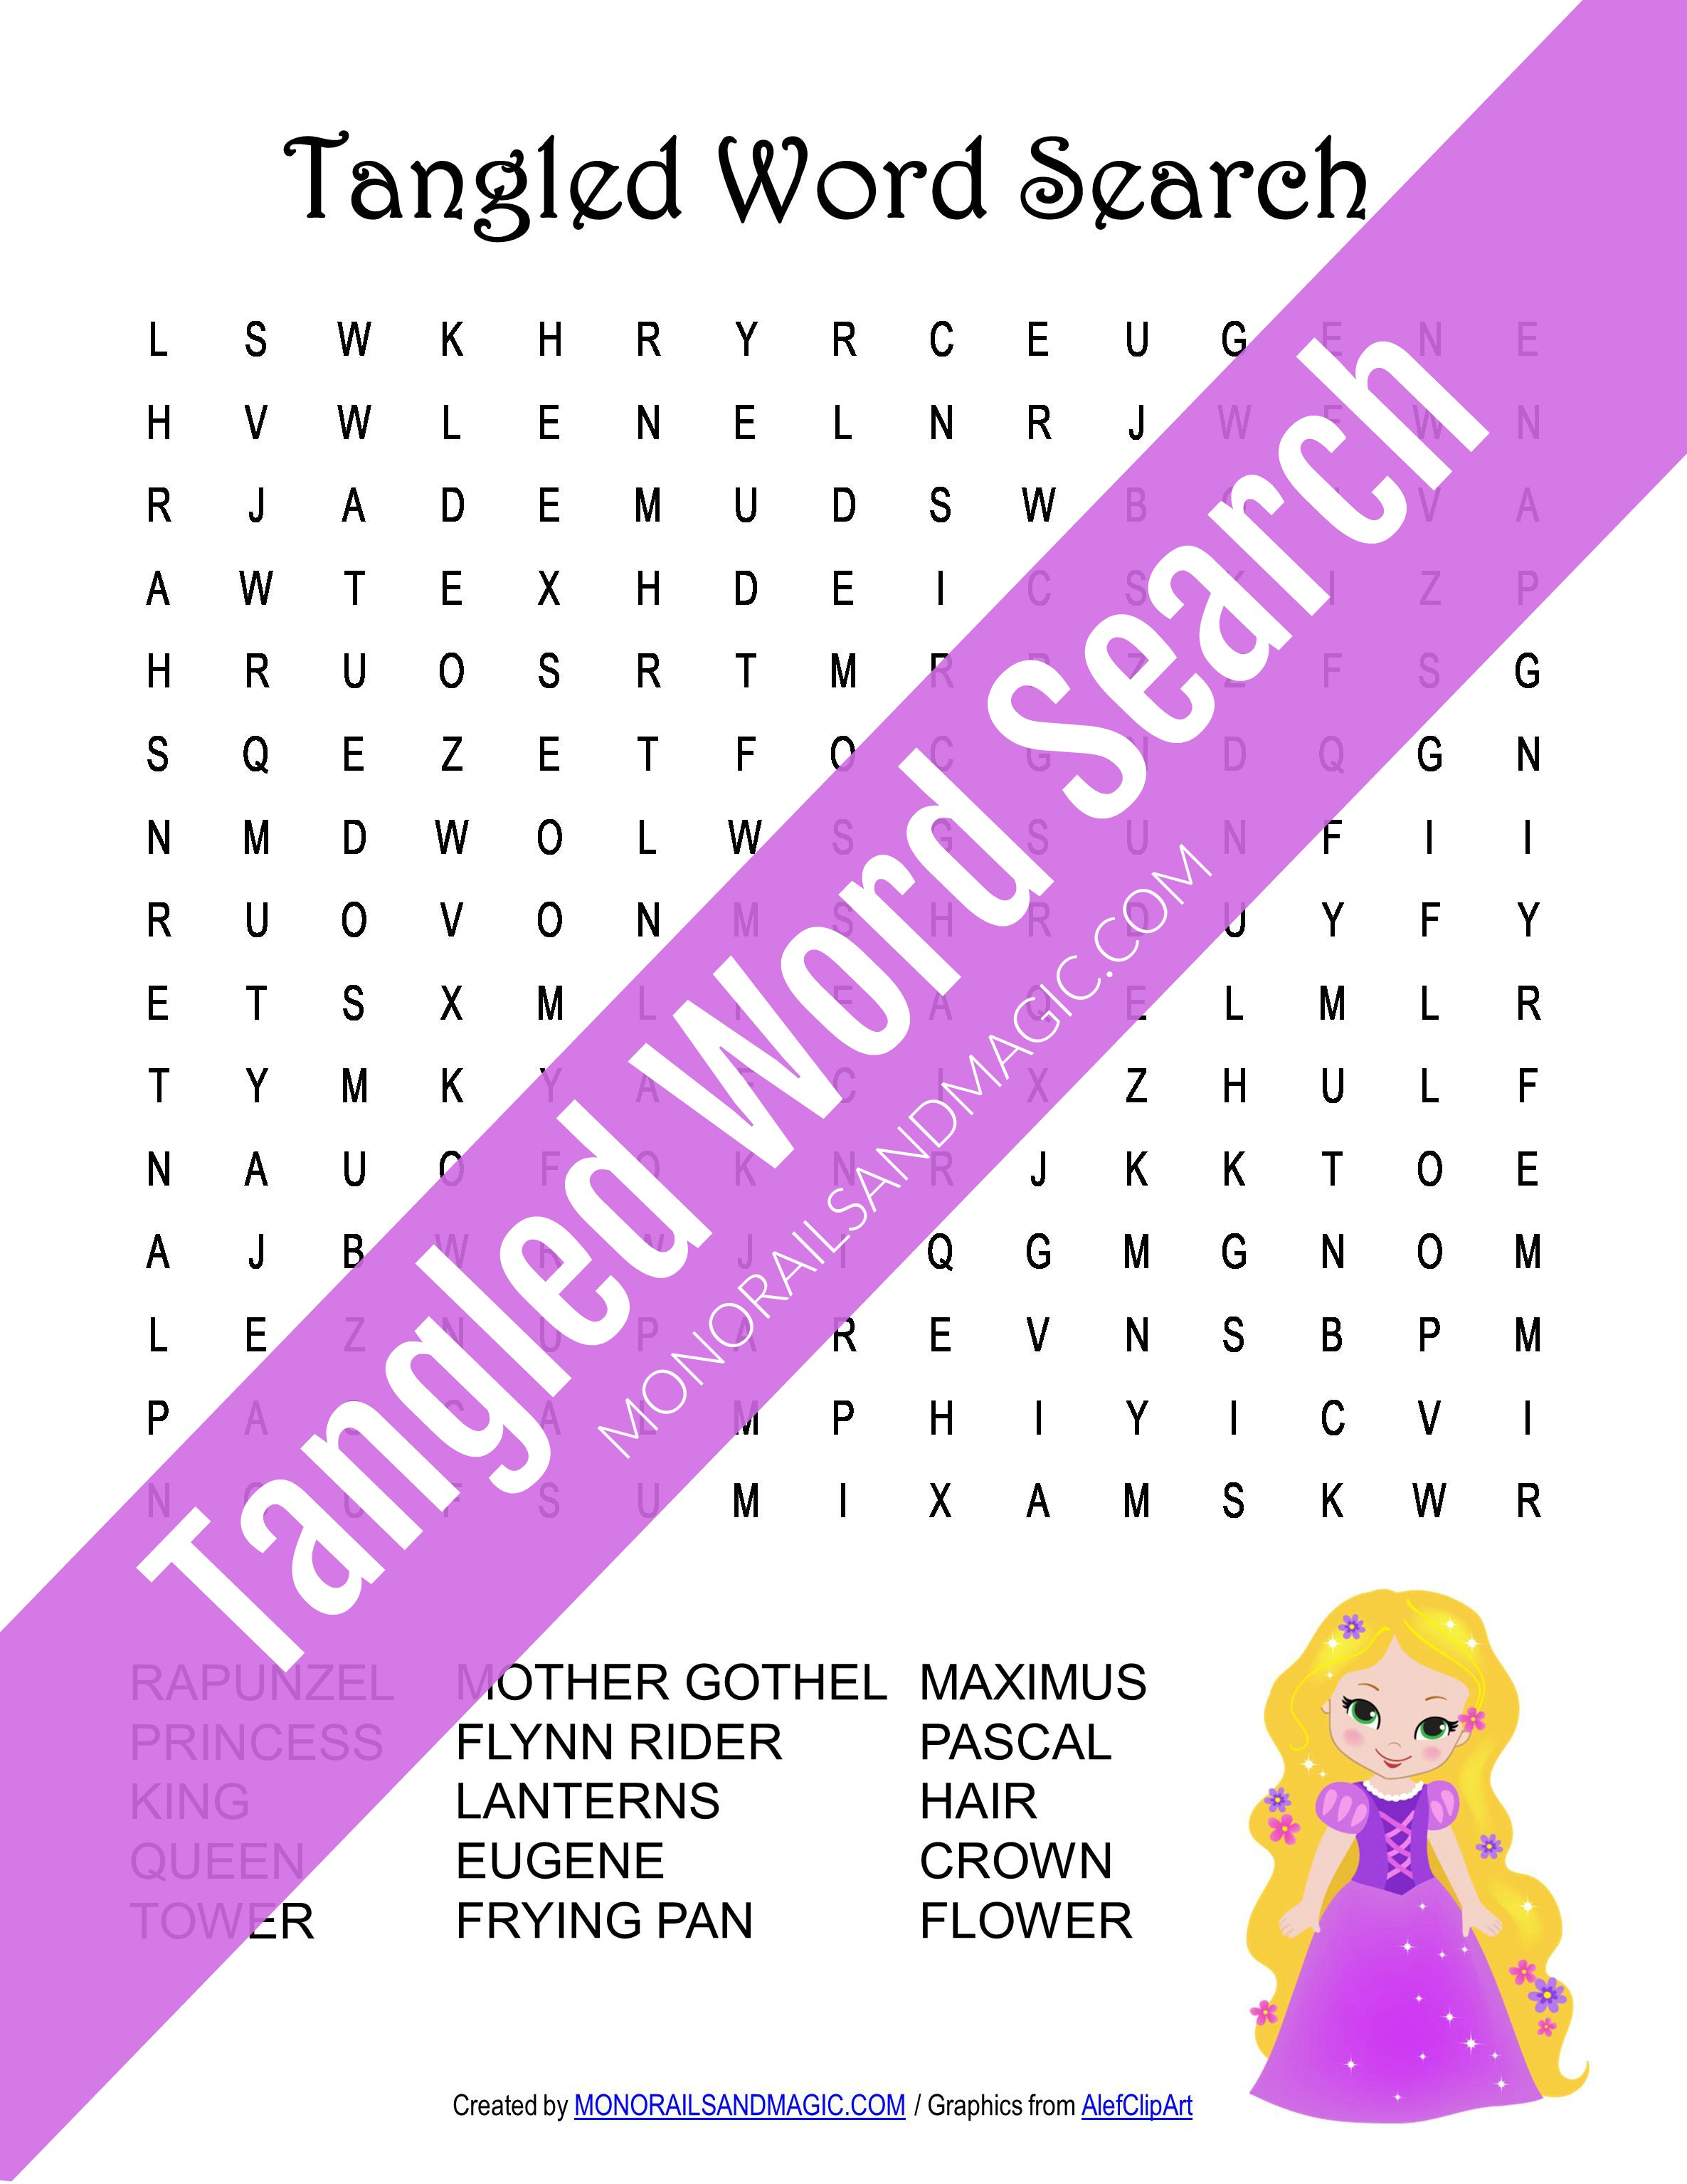 Tangled Word Search Free Printable intended for Disney Princess Word Search